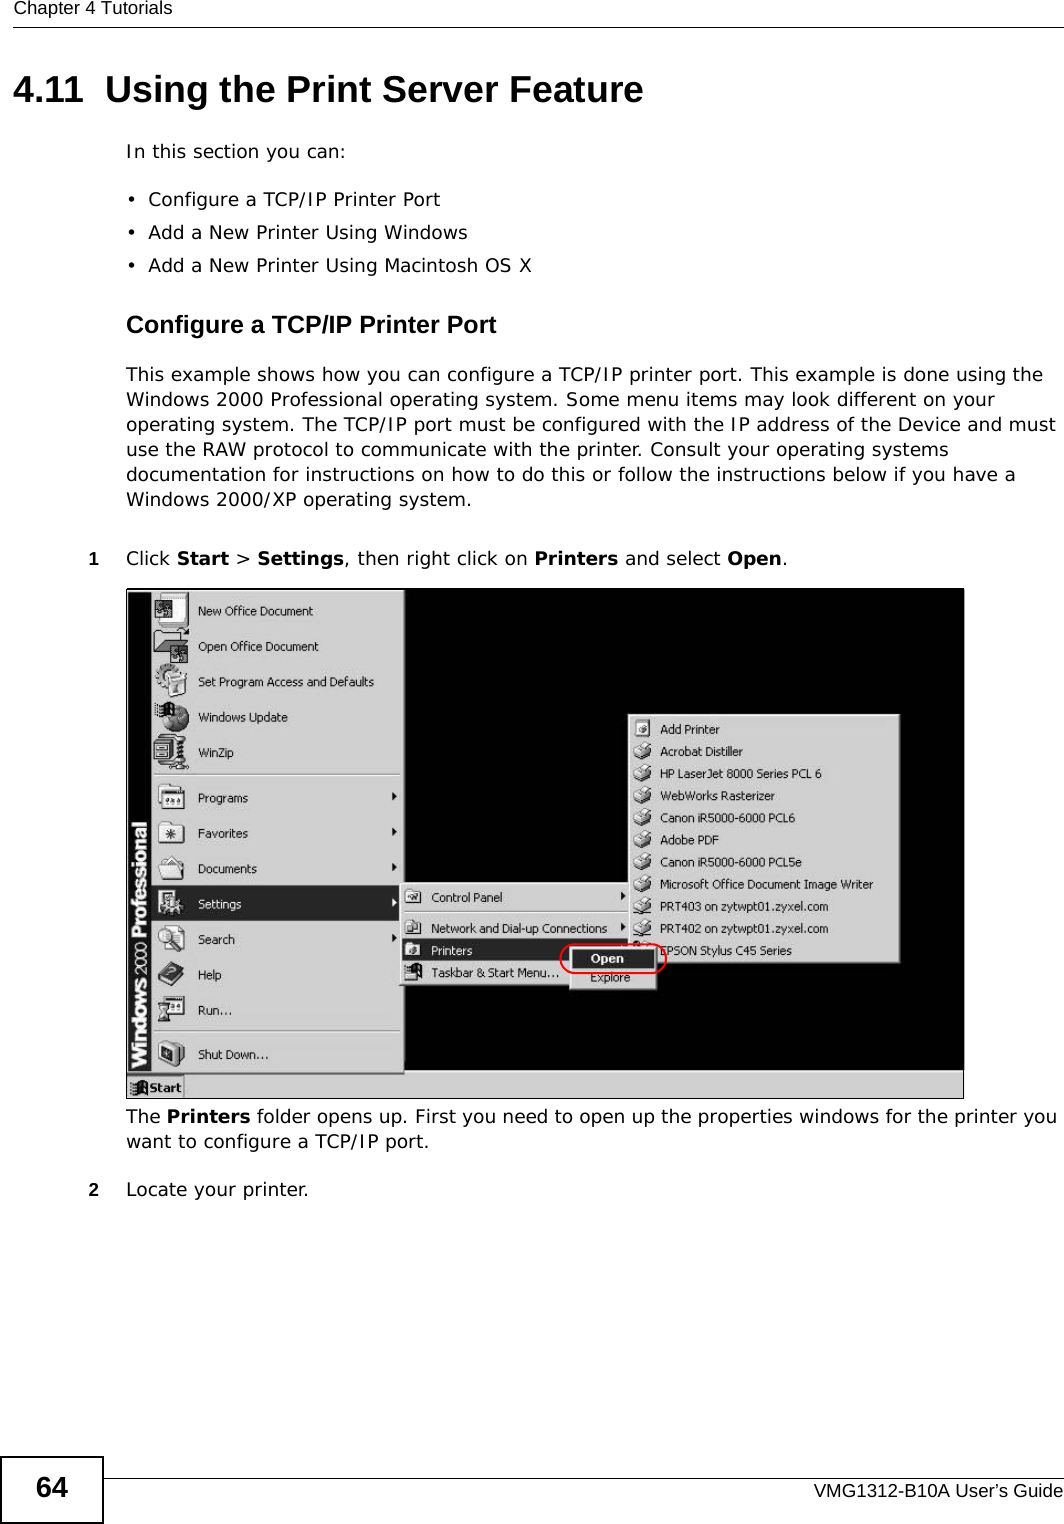 Chapter 4 TutorialsVMG1312-B10A User’s Guide644.11  Using the Print Server FeatureIn this section you can:• Configure a TCP/IP Printer Port• Add a New Printer Using Windows• Add a New Printer Using Macintosh OS XConfigure a TCP/IP Printer PortThis example shows how you can configure a TCP/IP printer port. This example is done using the Windows 2000 Professional operating system. Some menu items may look different on your operating system. The TCP/IP port must be configured with the IP address of the Device and must use the RAW protocol to communicate with the printer. Consult your operating systems documentation for instructions on how to do this or follow the instructions below if you have a Windows 2000/XP operating system. 1Click Start &gt; Settings, then right click on Printers and select Open.Tutorial: Open Printers WindowThe Printers folder opens up. First you need to open up the properties windows for the printer you want to configure a TCP/IP port.2Locate your printer.